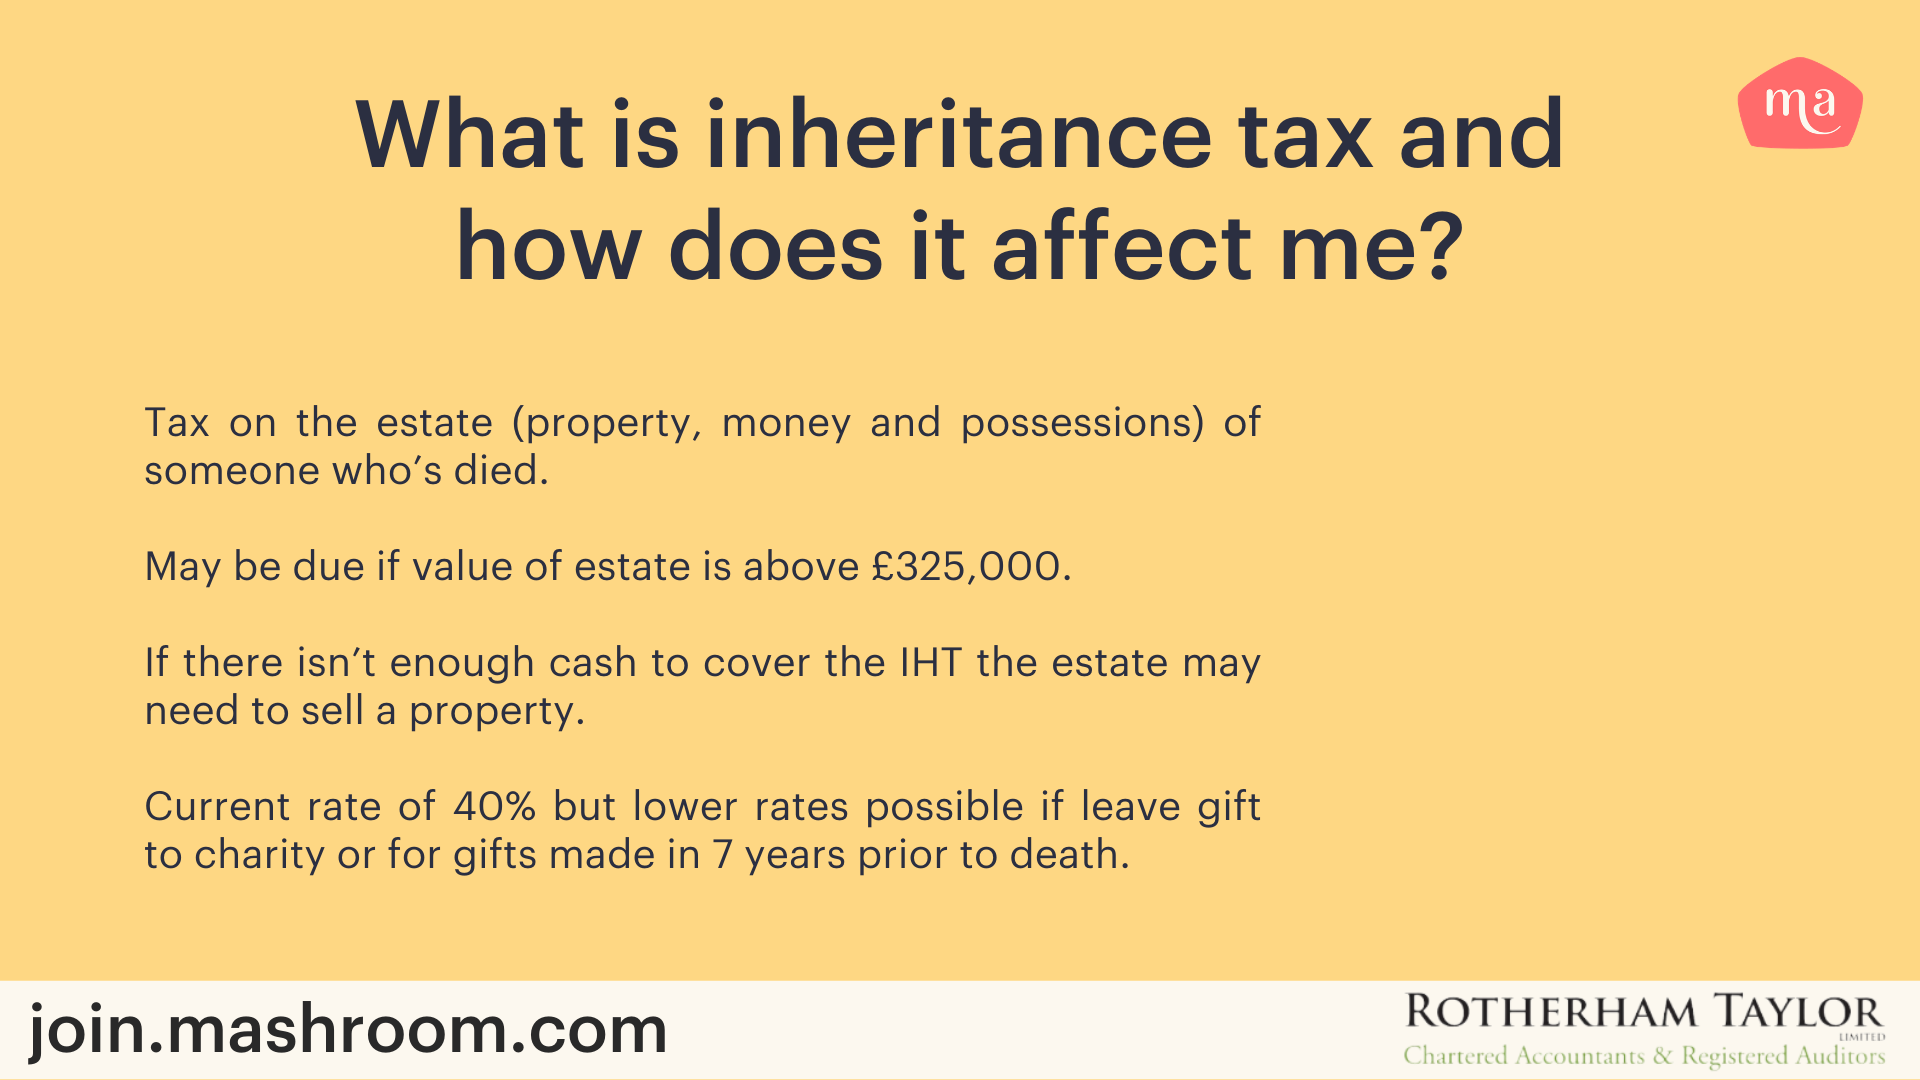 image with text saying 'what is inheritance tax and how does it affect me?'